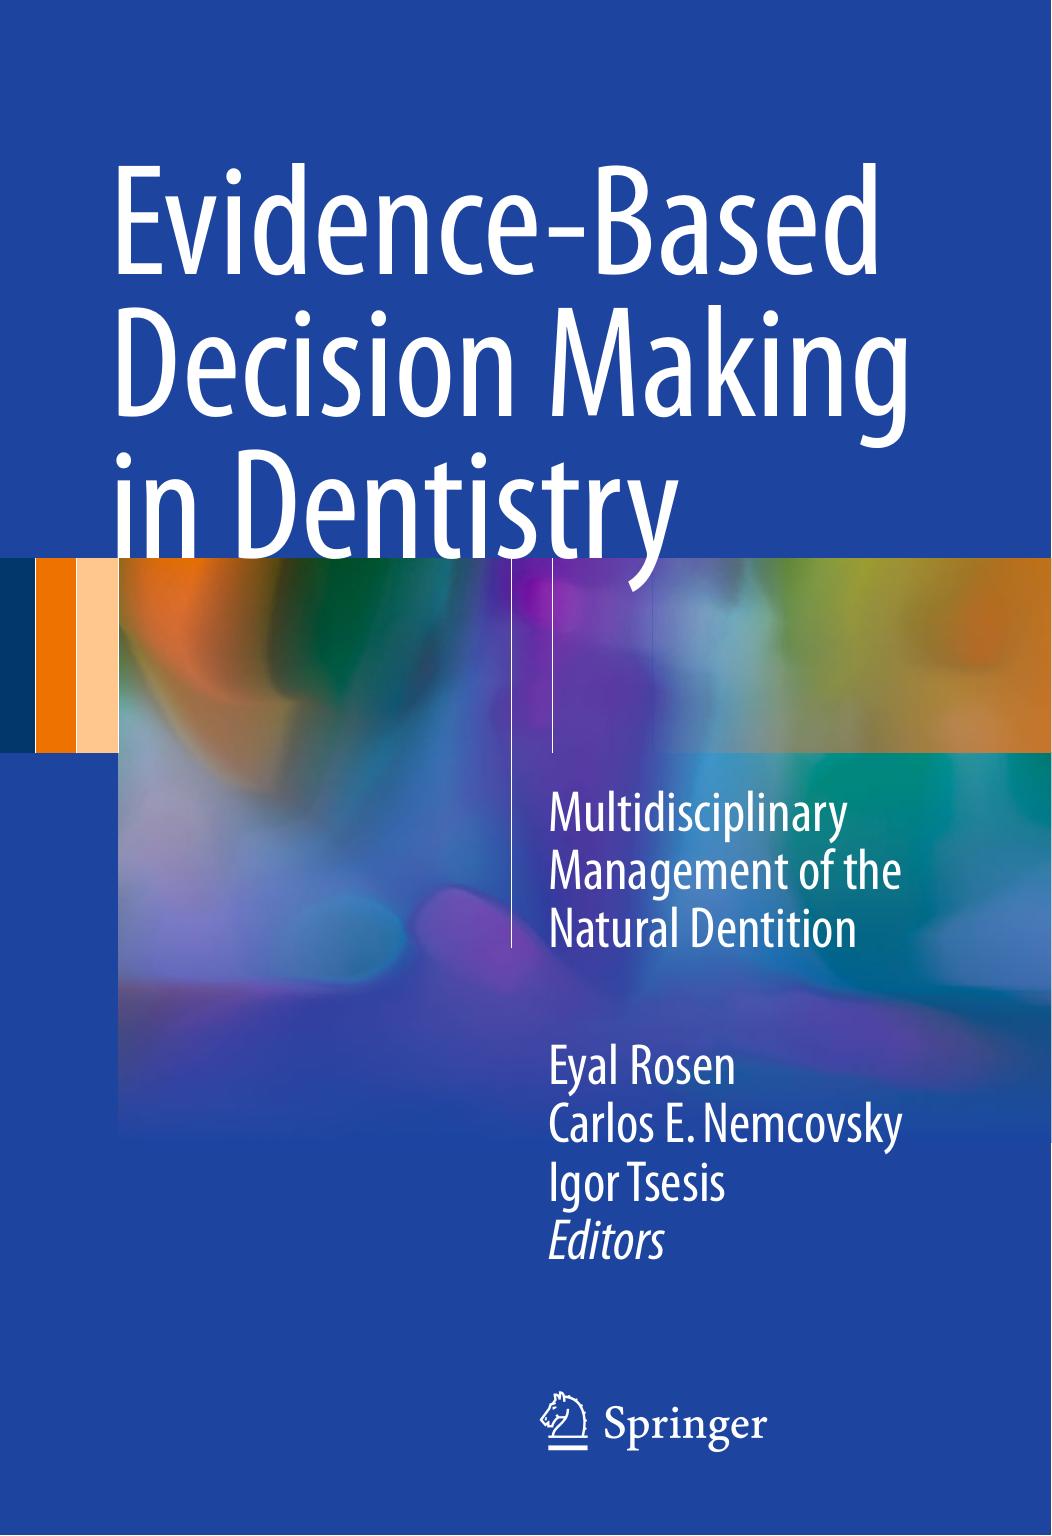 Evidence-Based Decision Making in Dentistry Multidisciplinary Management of the Natural Dentition